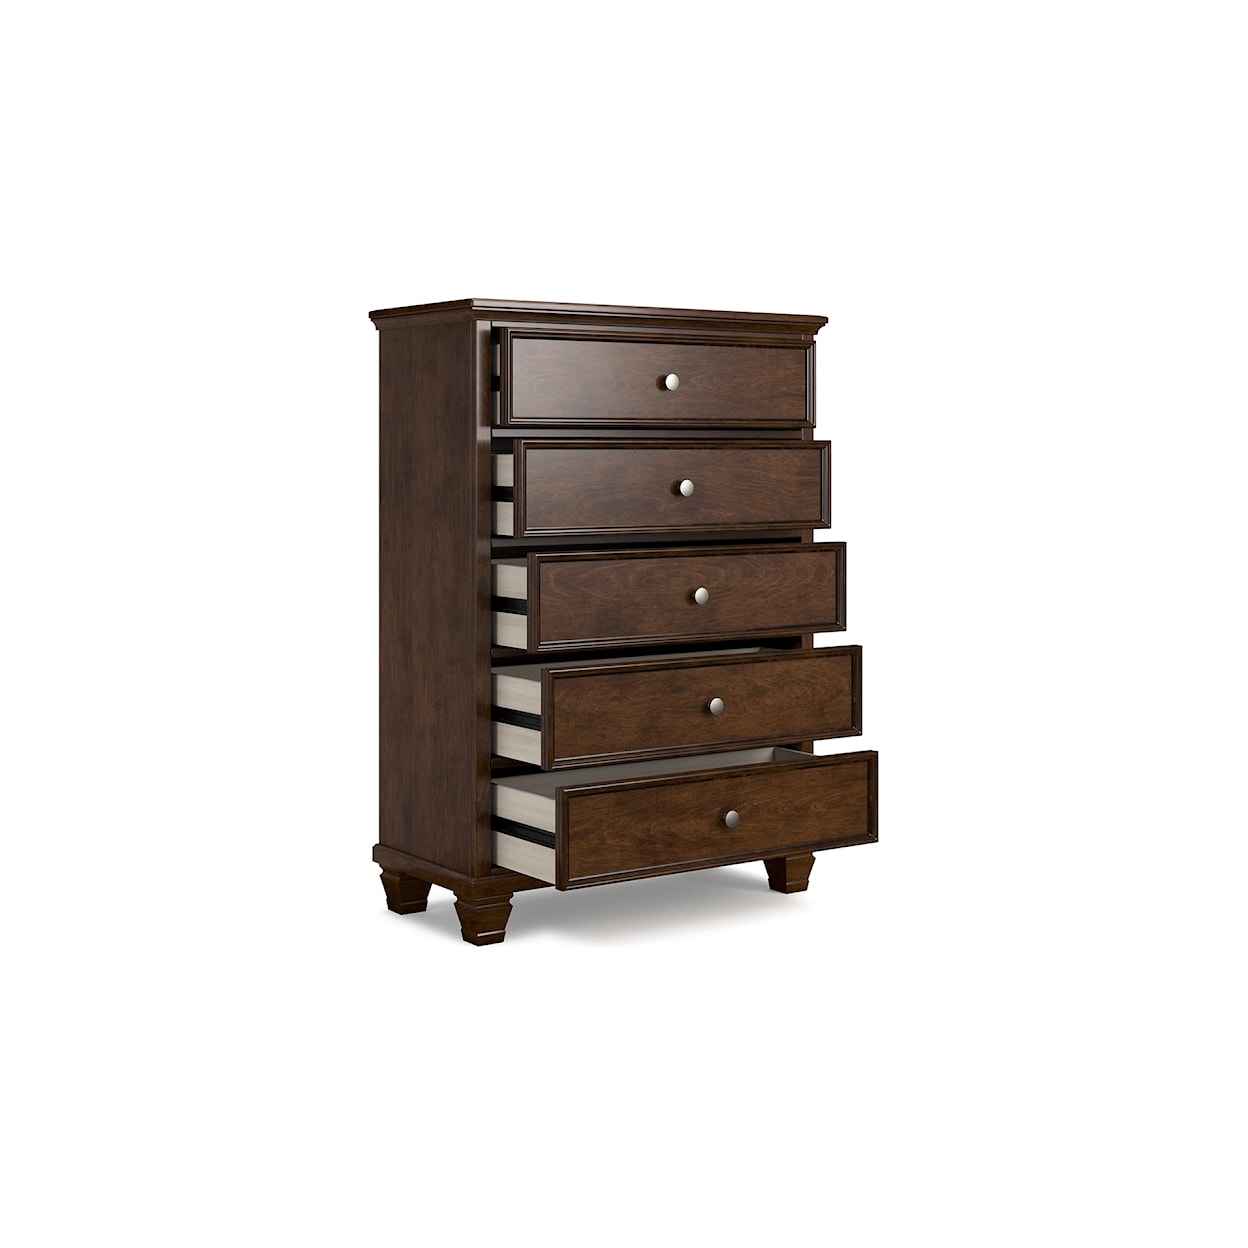 Signature Design by Ashley Furniture Danabrin Bedroom Chest